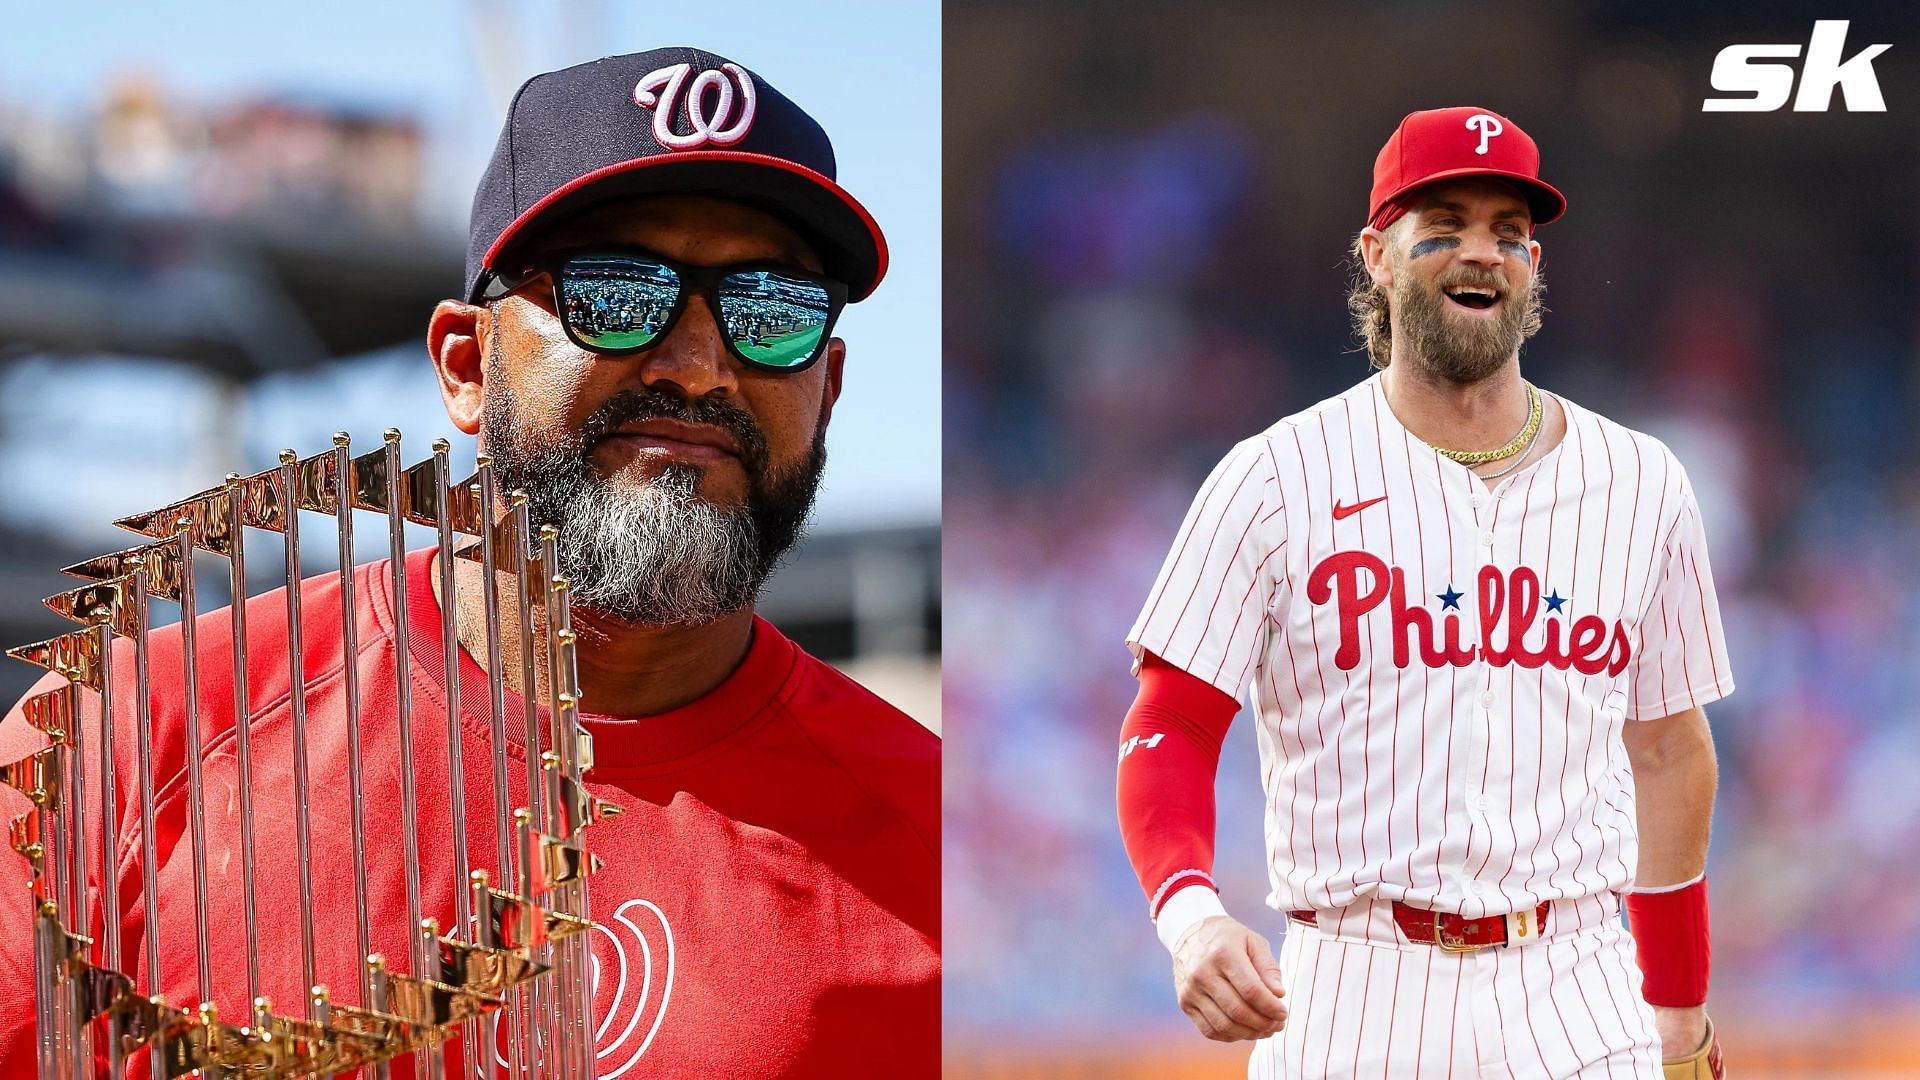 Bryce Harper says that he knew the Washington Nationals were going to win the World Series after they signed Patrick Corbin